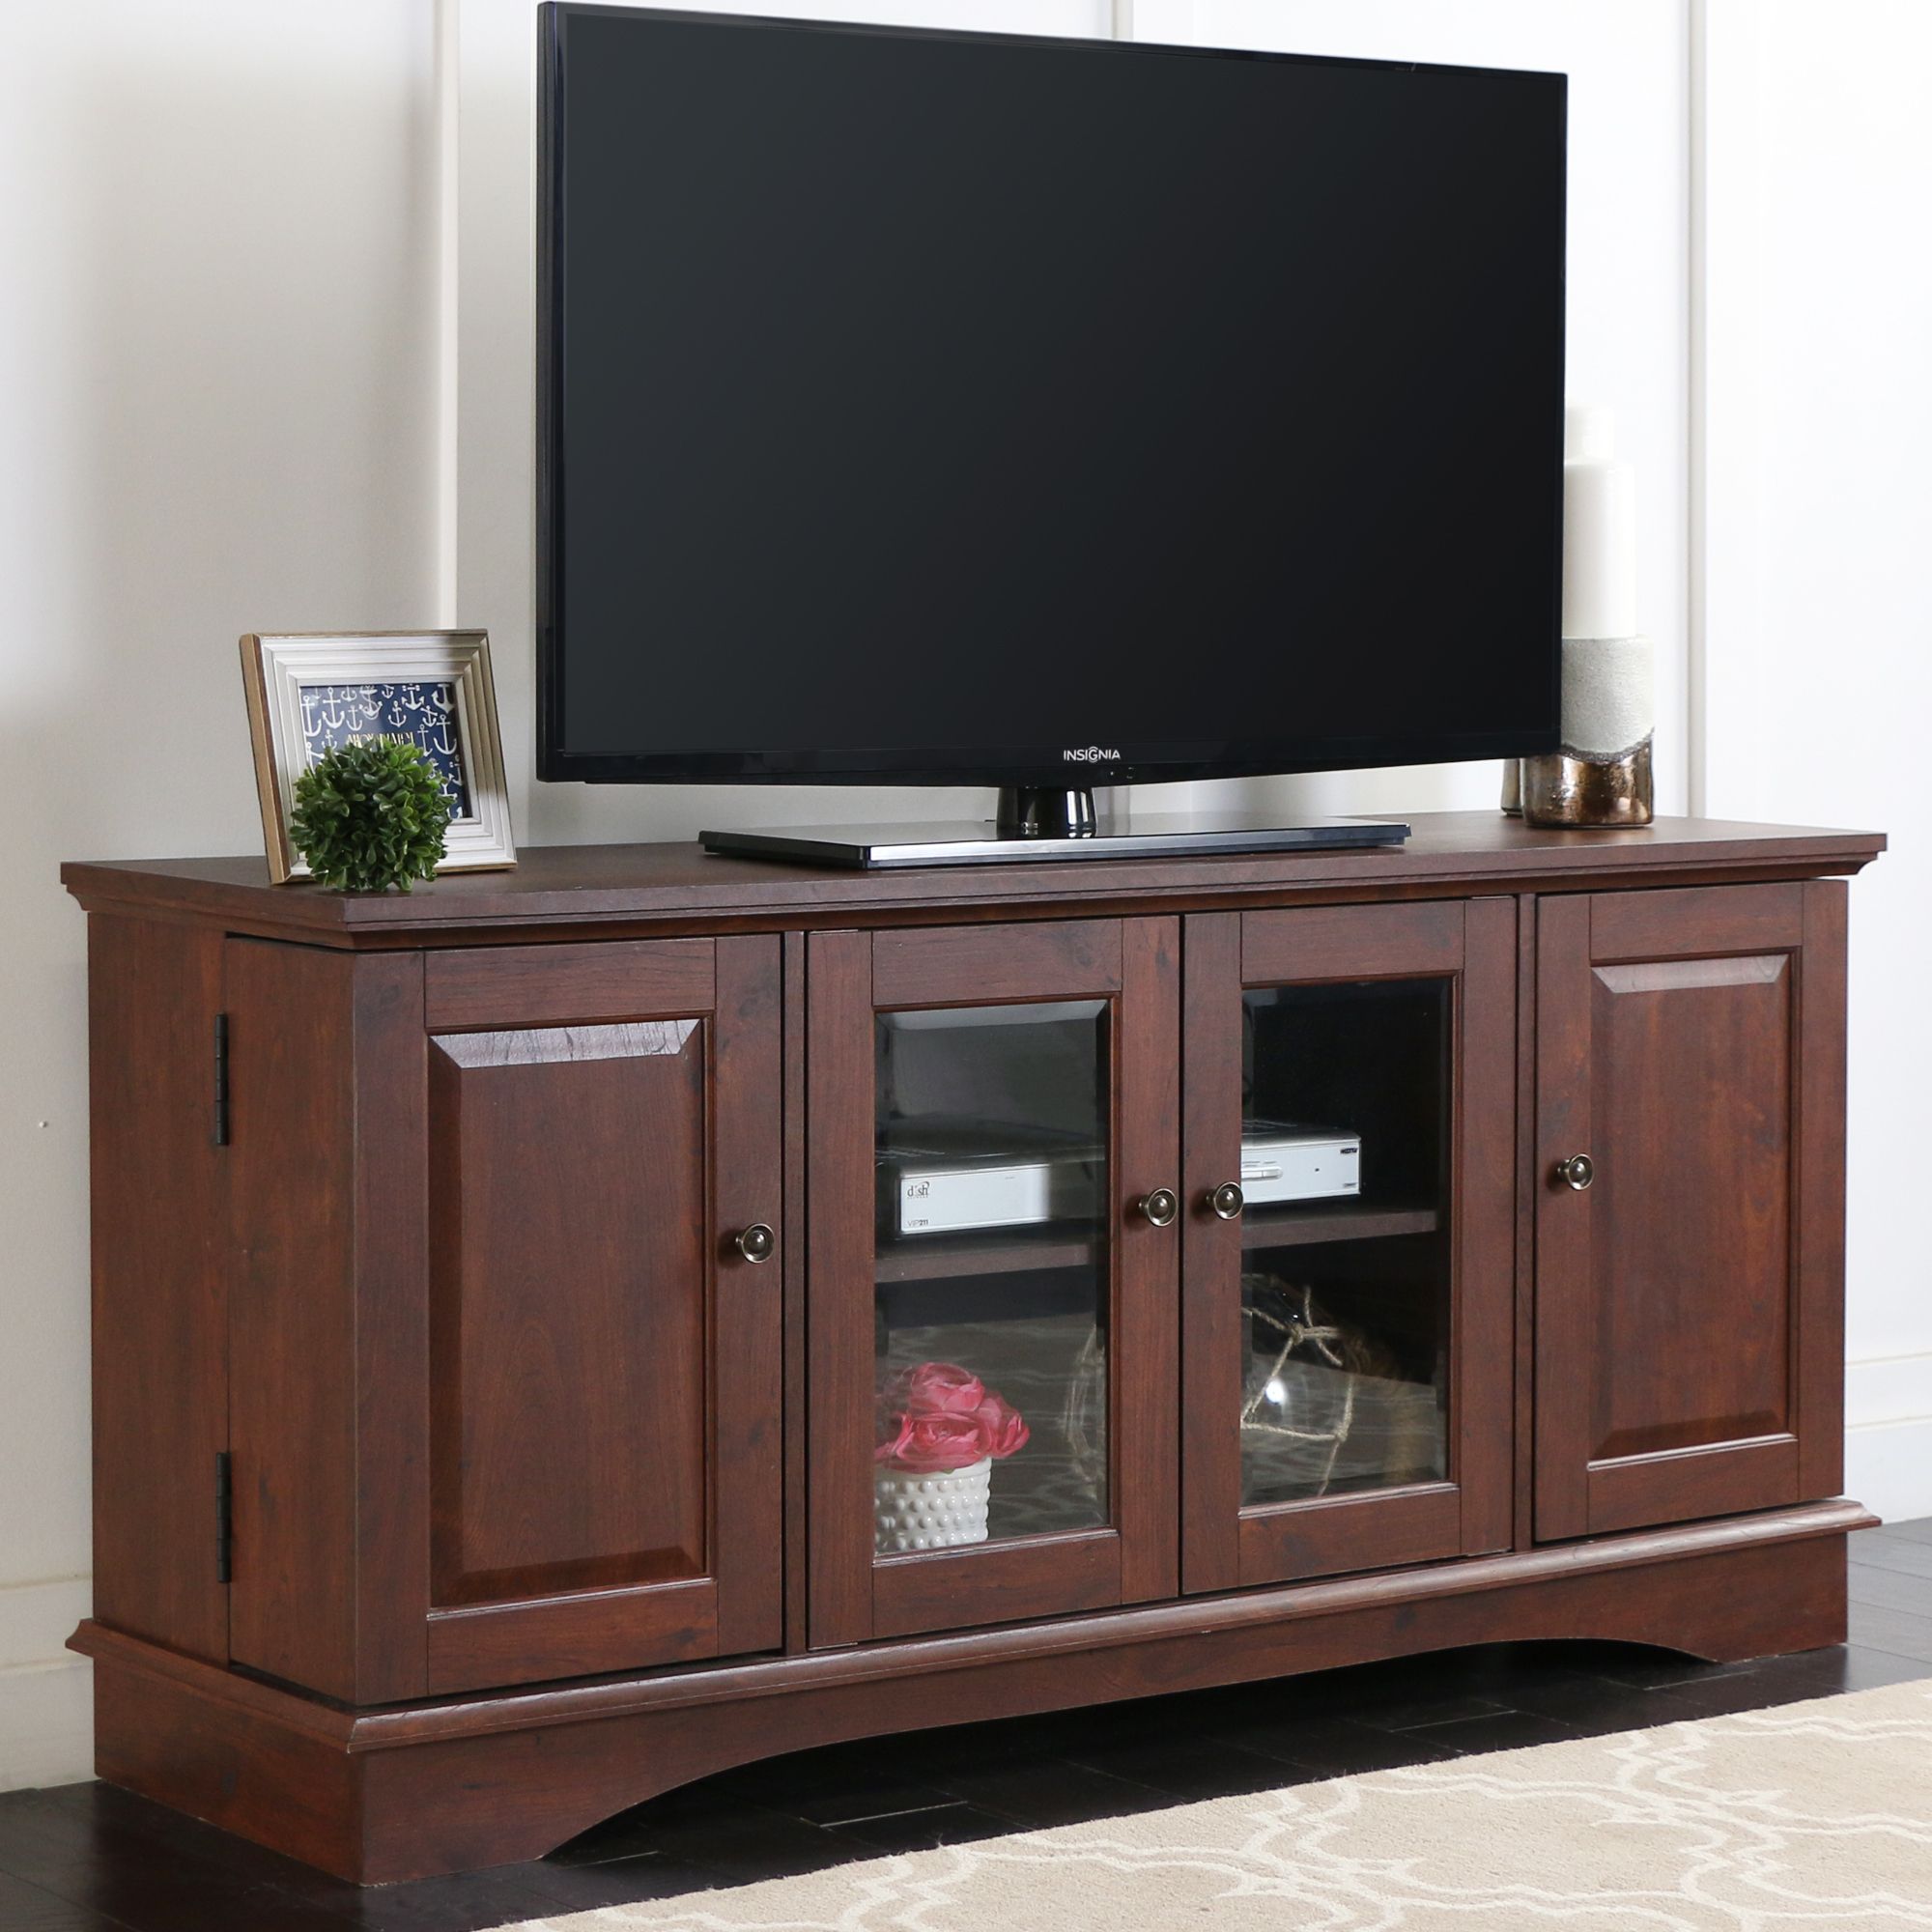 Walker Edison Wood Tv Stand For Tvs Up To 55"  Brown With Wood And Glass Tv Stands For Flat Screens (View 8 of 15)